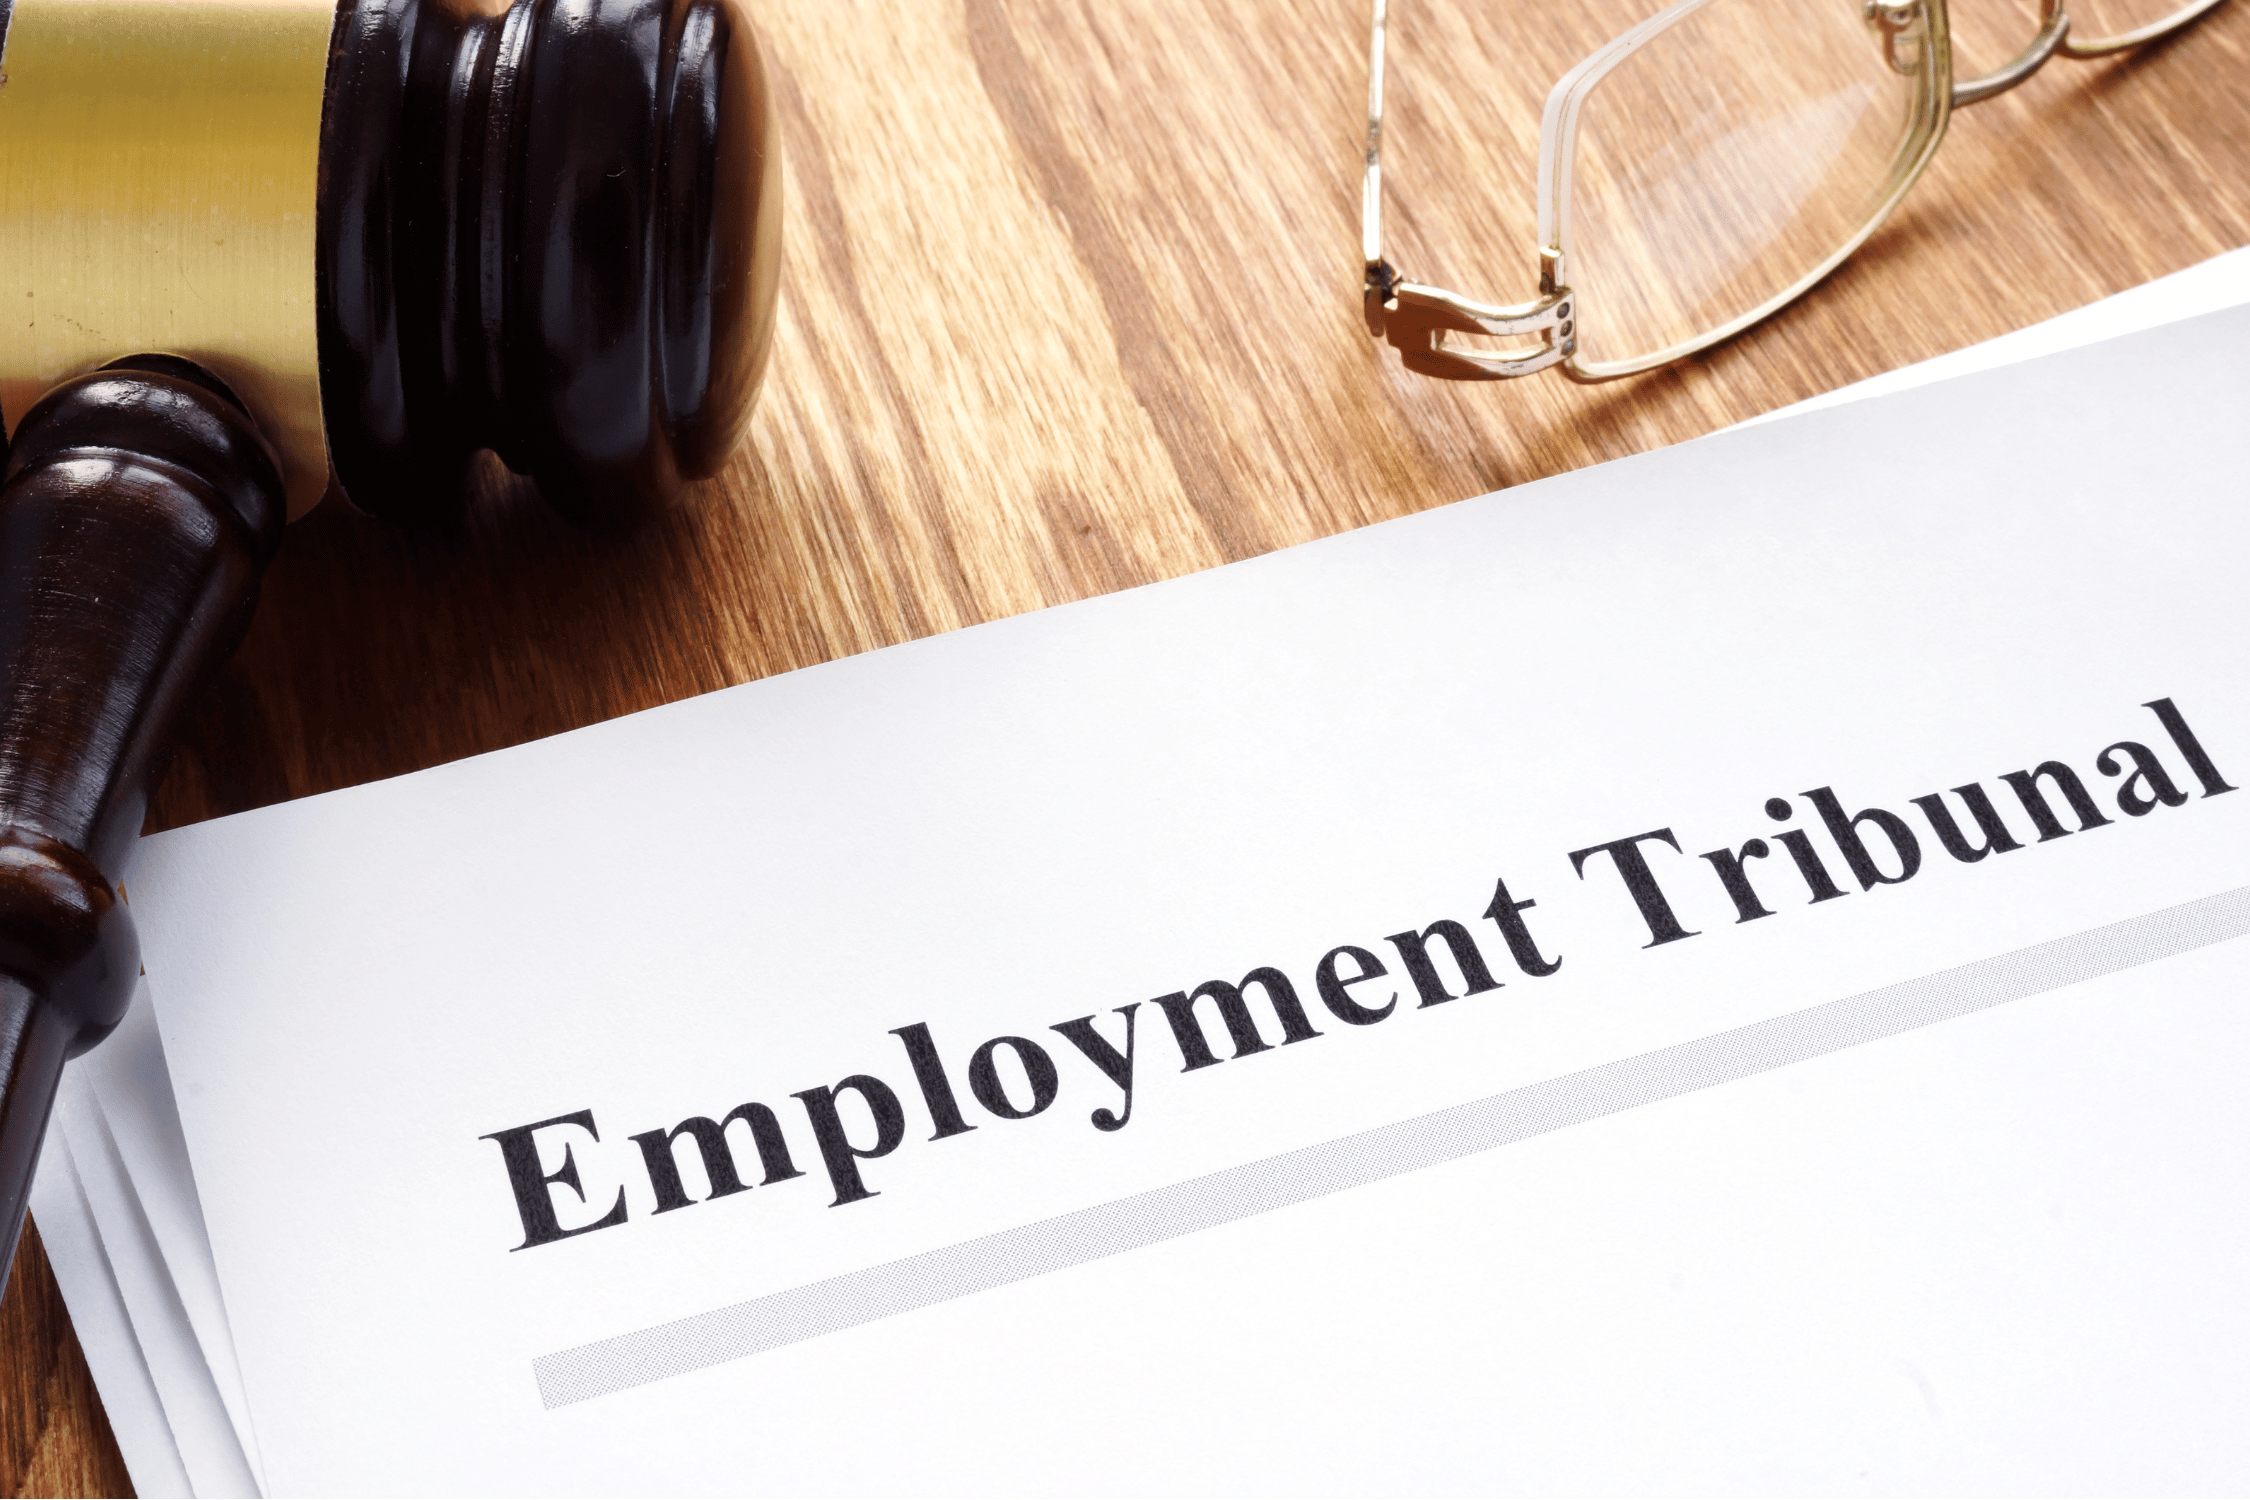 The Employment Tribunal will deal with escalated sexual orientation discrimination cases